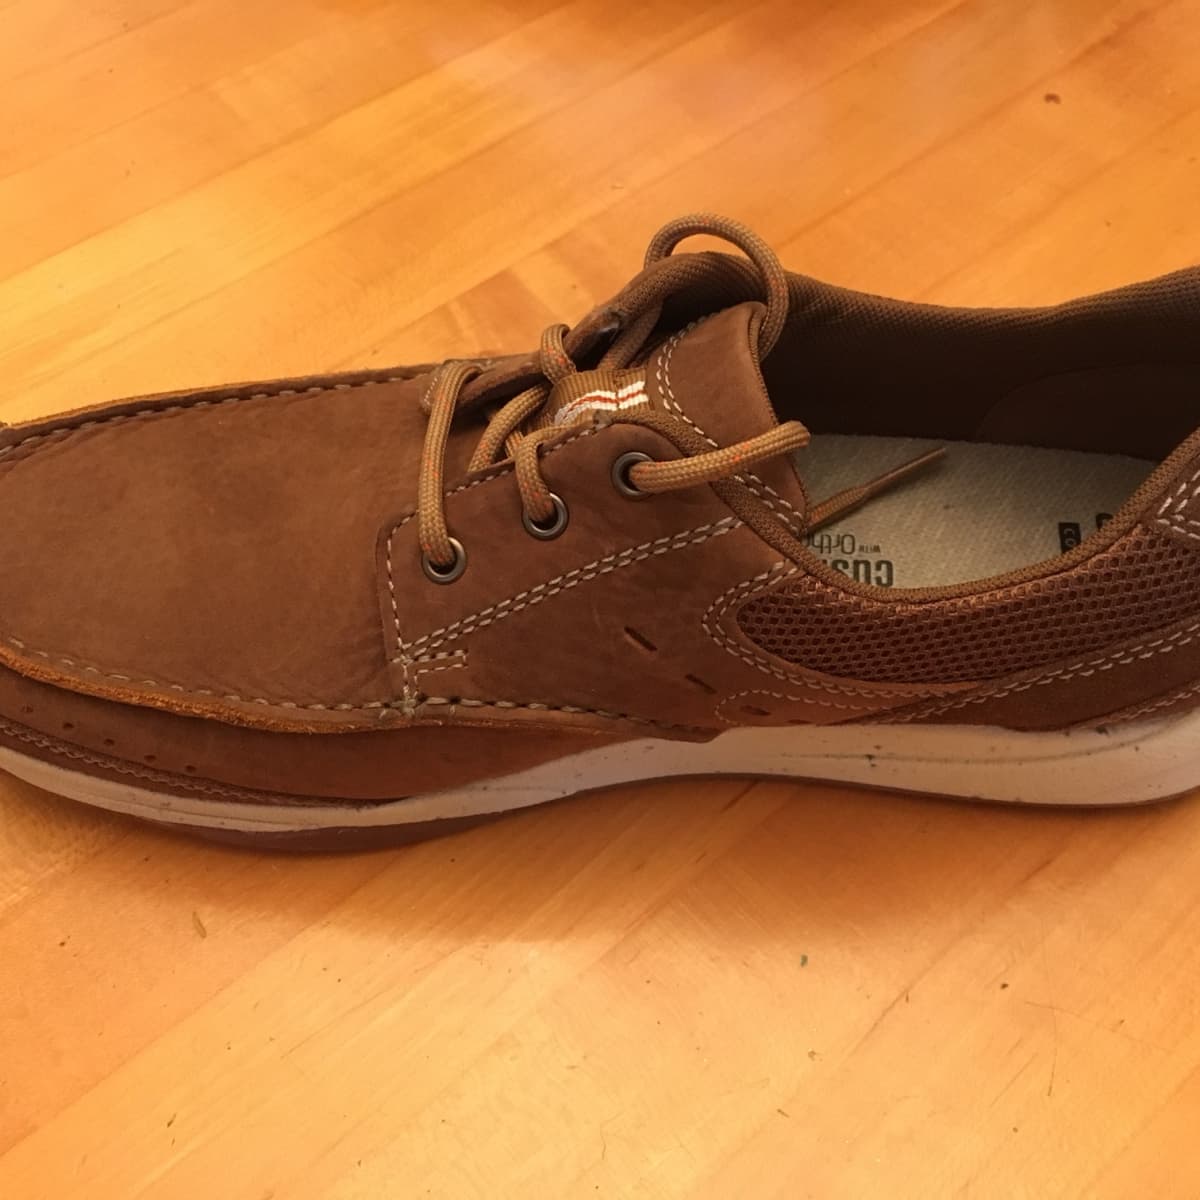 My of Clarks Shoes: The Comfortable Footwear - Bellatory